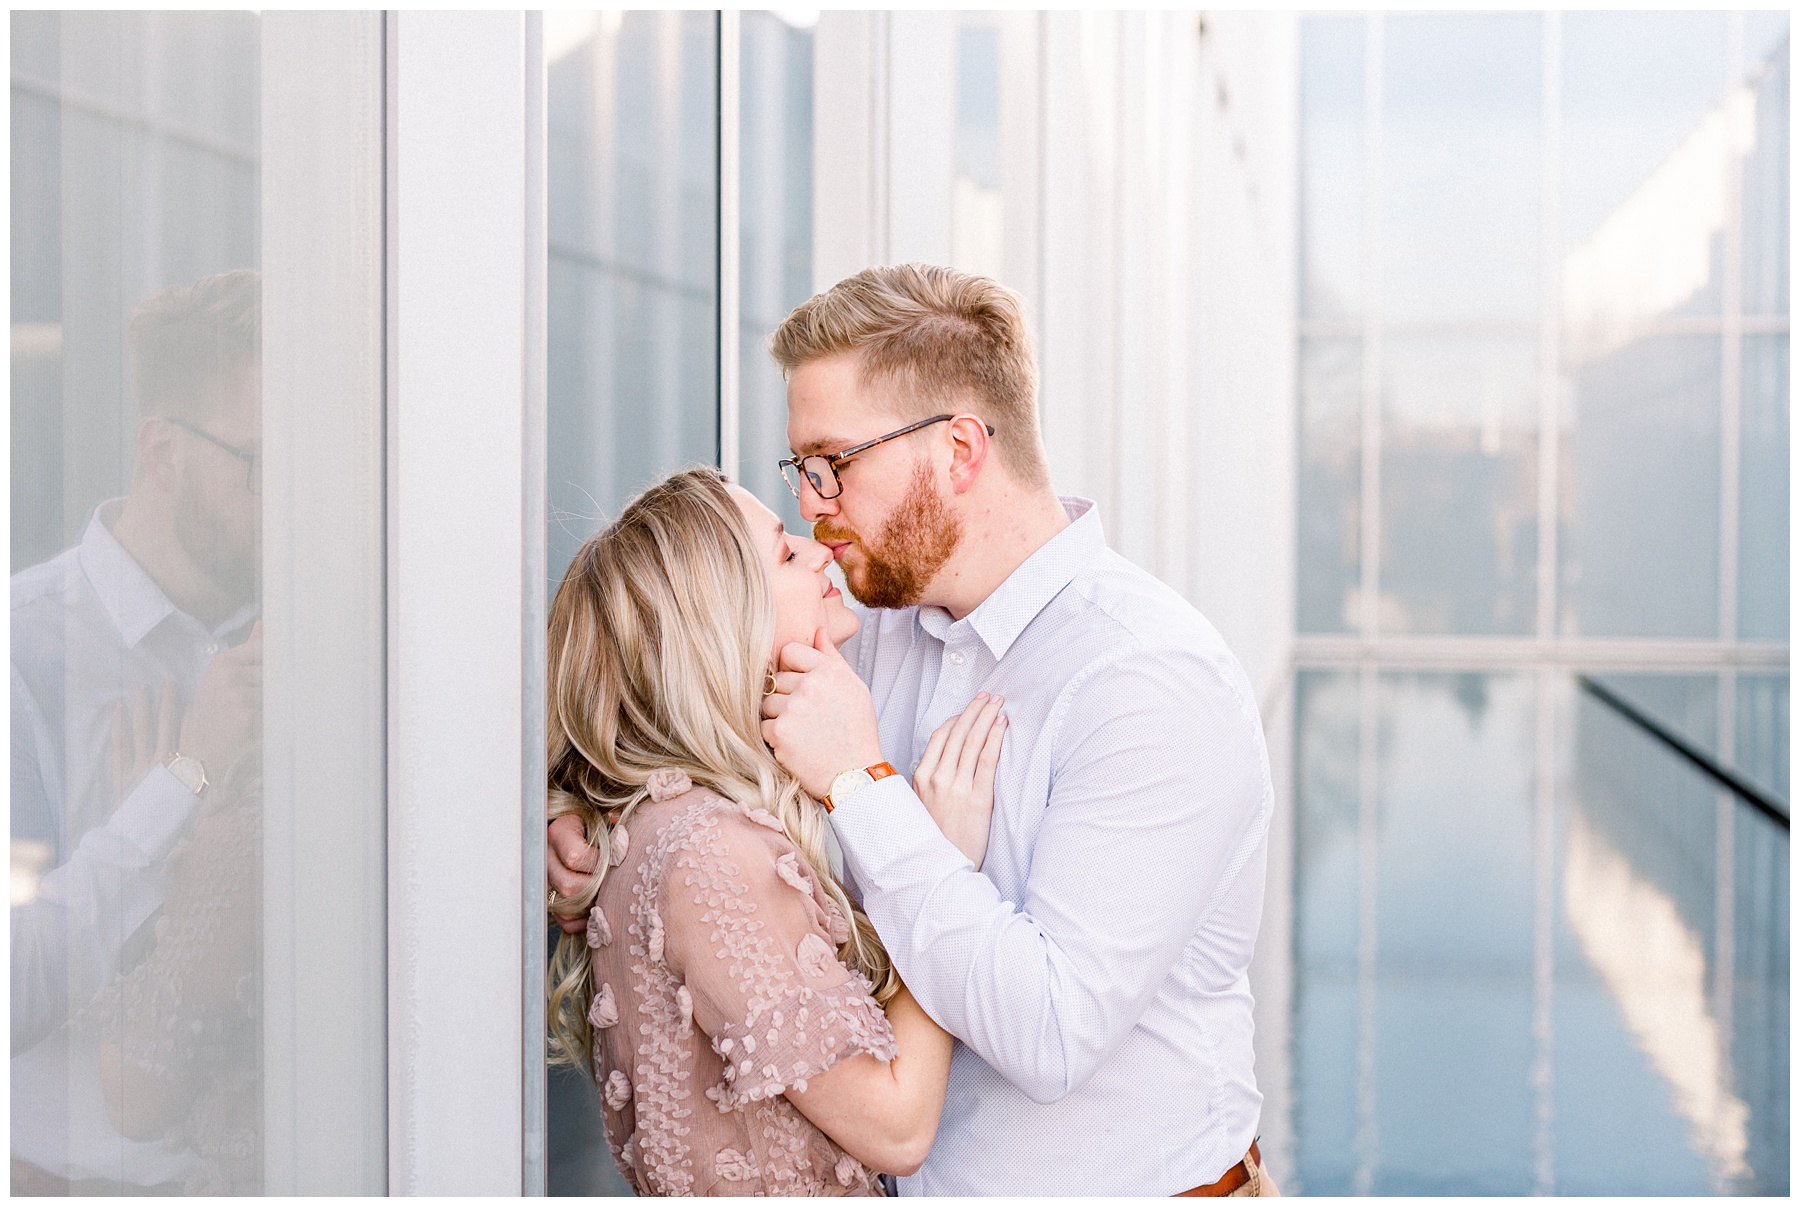 North Carolina Museum of Art Spring Engagement Session in Raleigh North Carolina